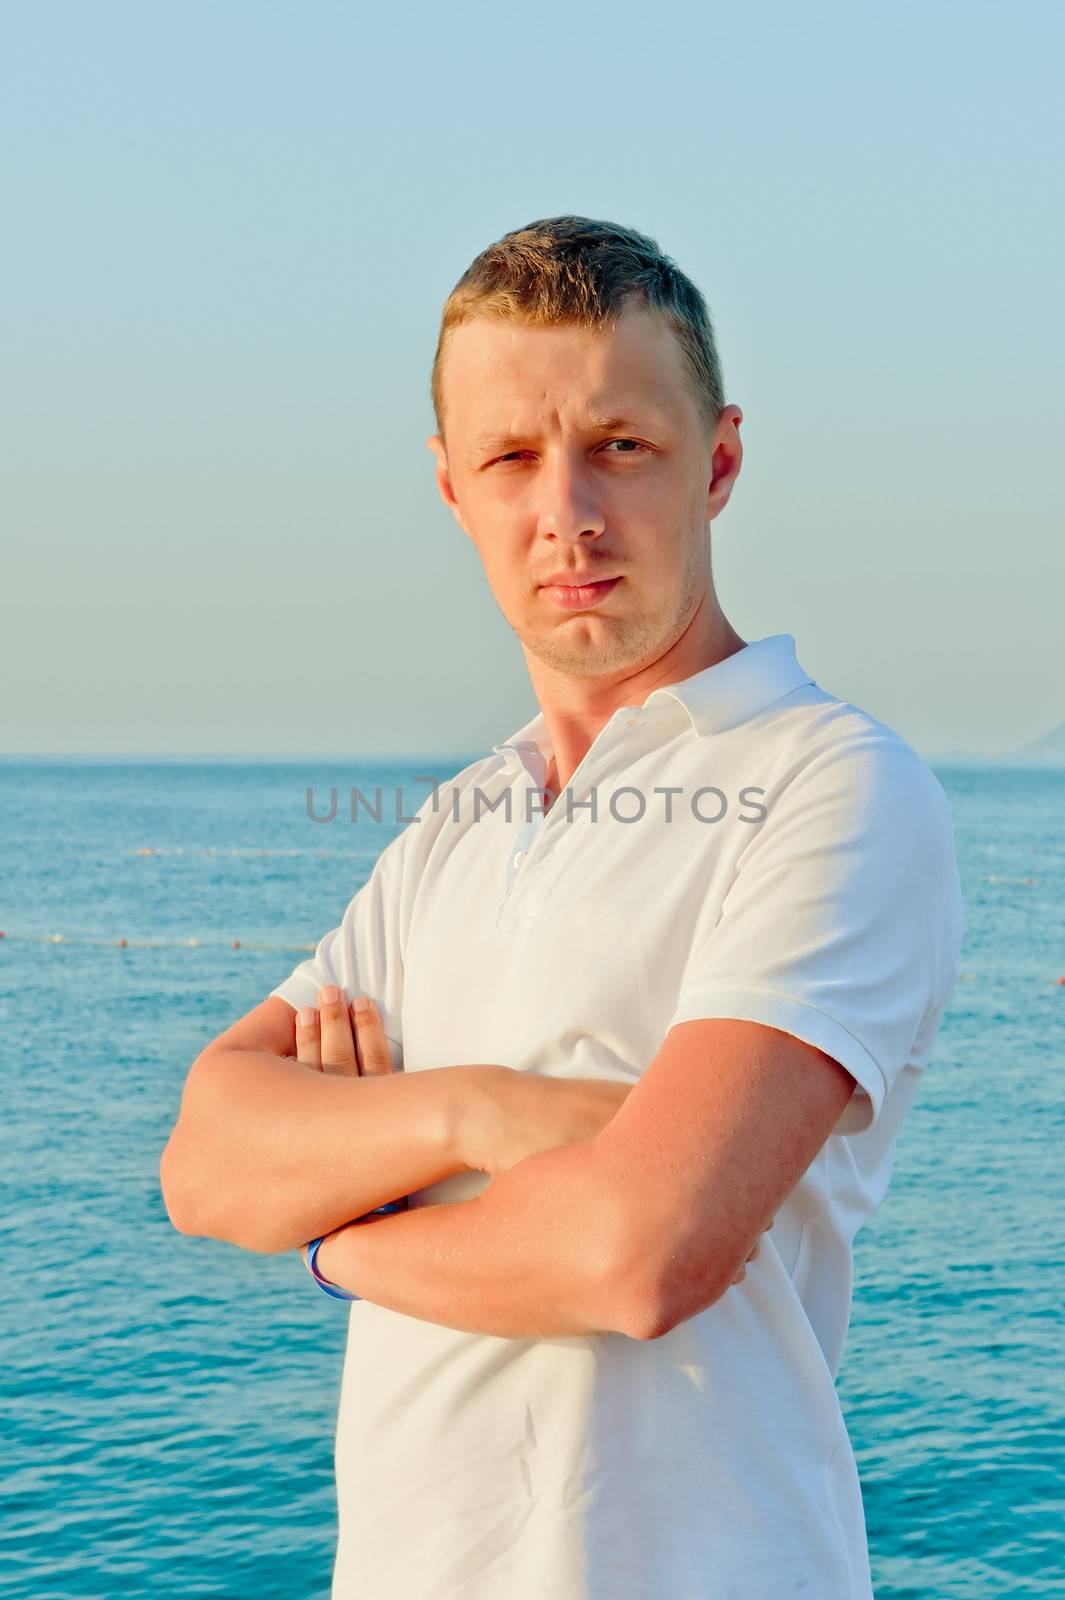 portrait of a man in a white shirt against the sea by kosmsos111